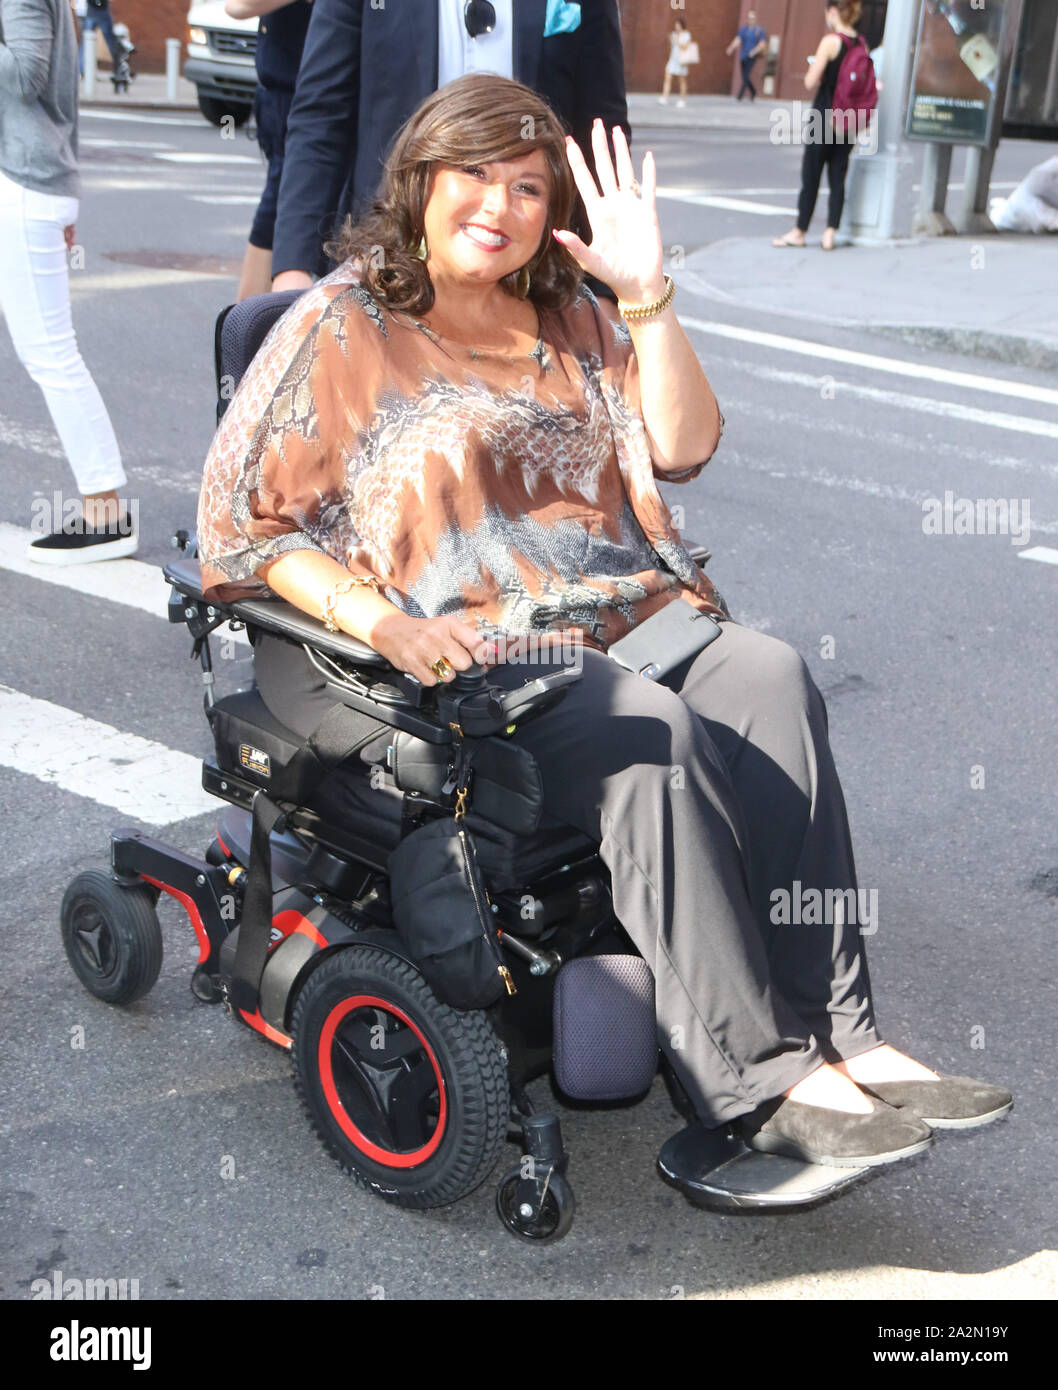 New York, USA. 02nd Oct, 2019. Abby Lee Miller at Build Series promoting  the new season Dance Moms in New York. October 02, 2019. Credit: Rw/Media  Punch/Alamy Live News Stock Photo - Alamy